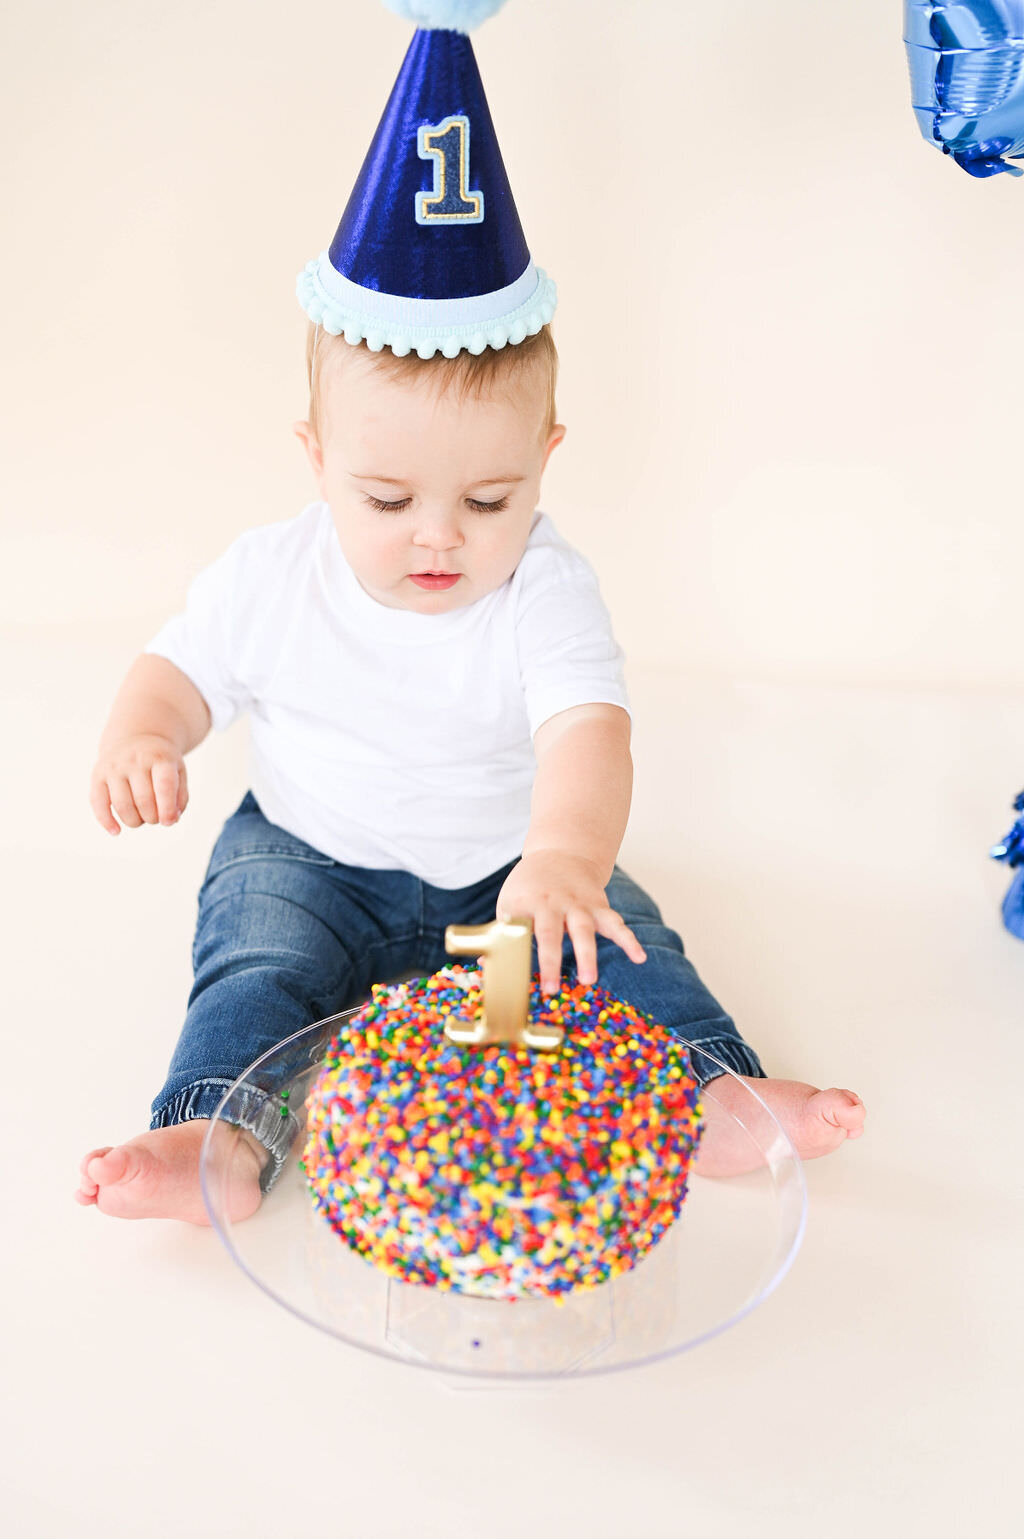 A small child with a party hat on reaching towards a round cake.